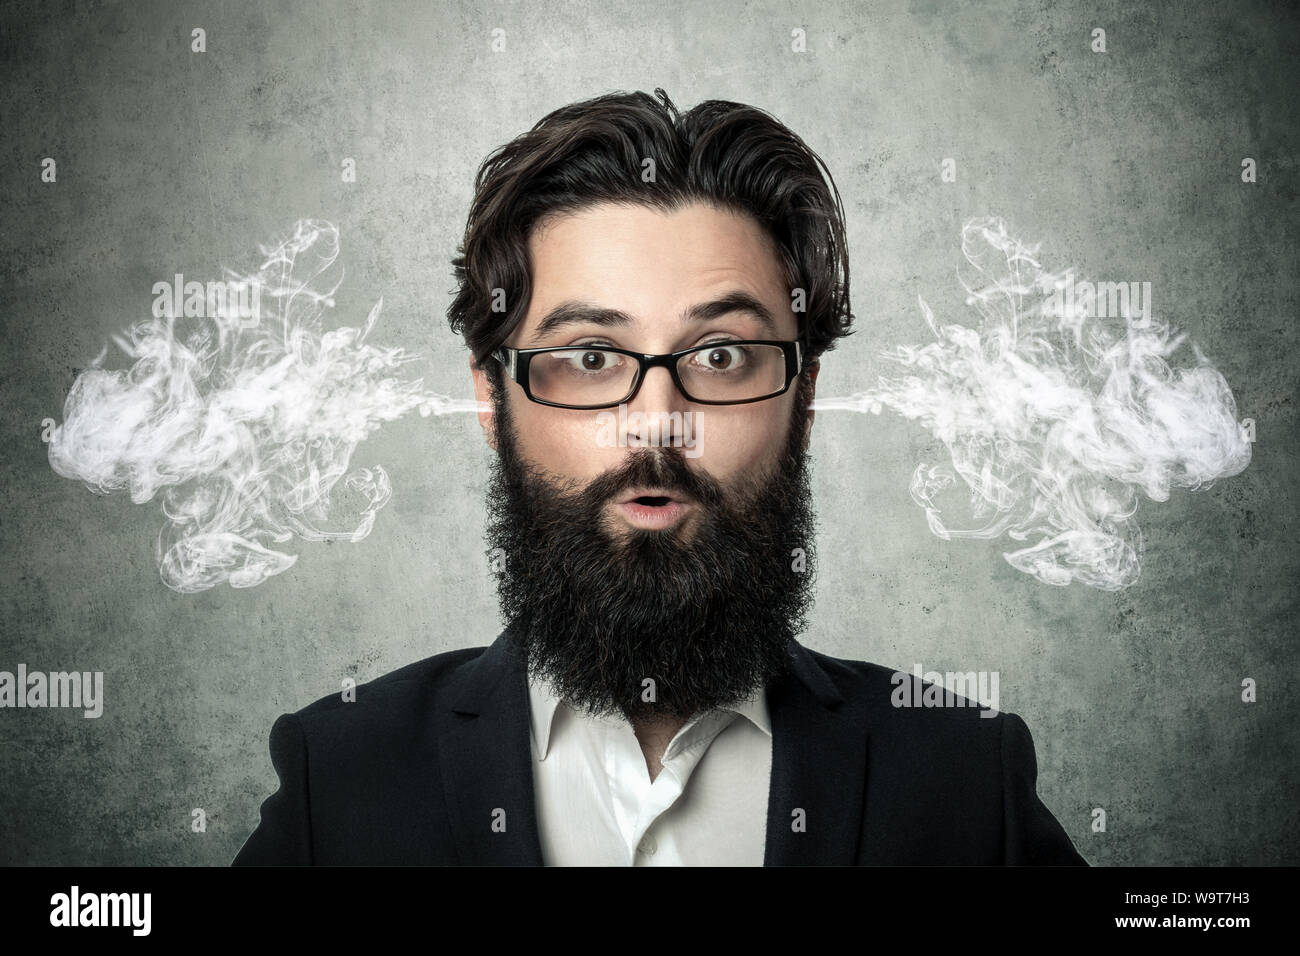 bearded surprised man, blowing steam coming out of ears, over gray background, negative human emotions, facial expression, feelings Stock Photo